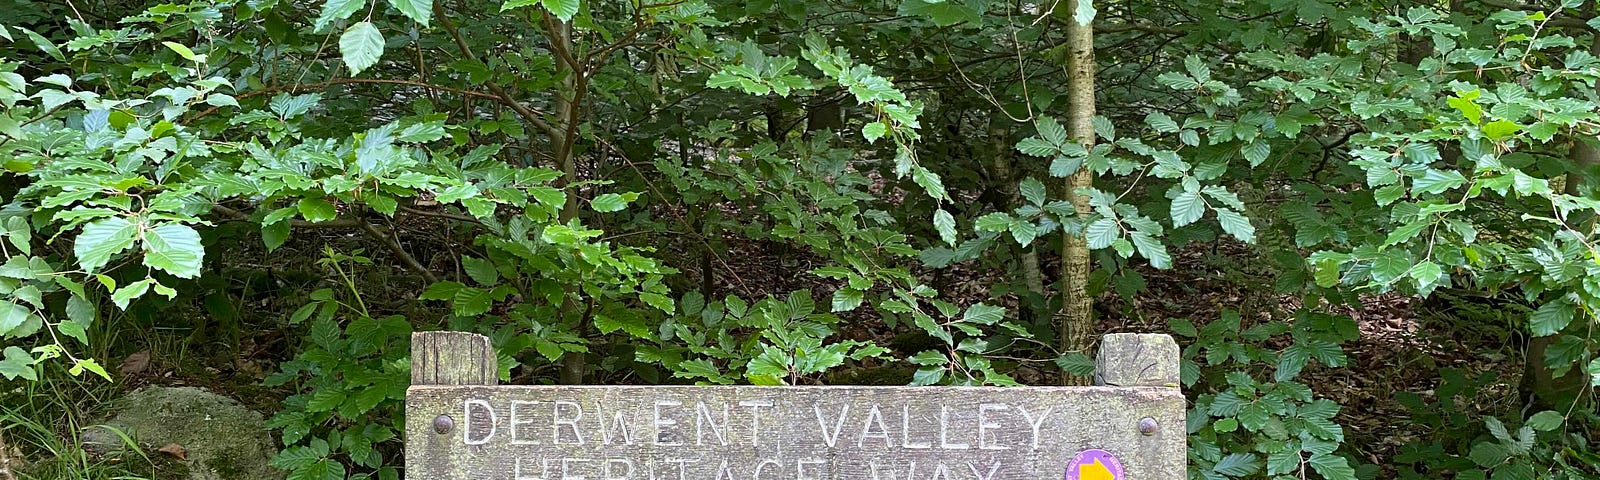 A wooden sign reads ‘Derwent Valley Heritage Way River Trent 55 miles’. Behind are green foilage and trees.